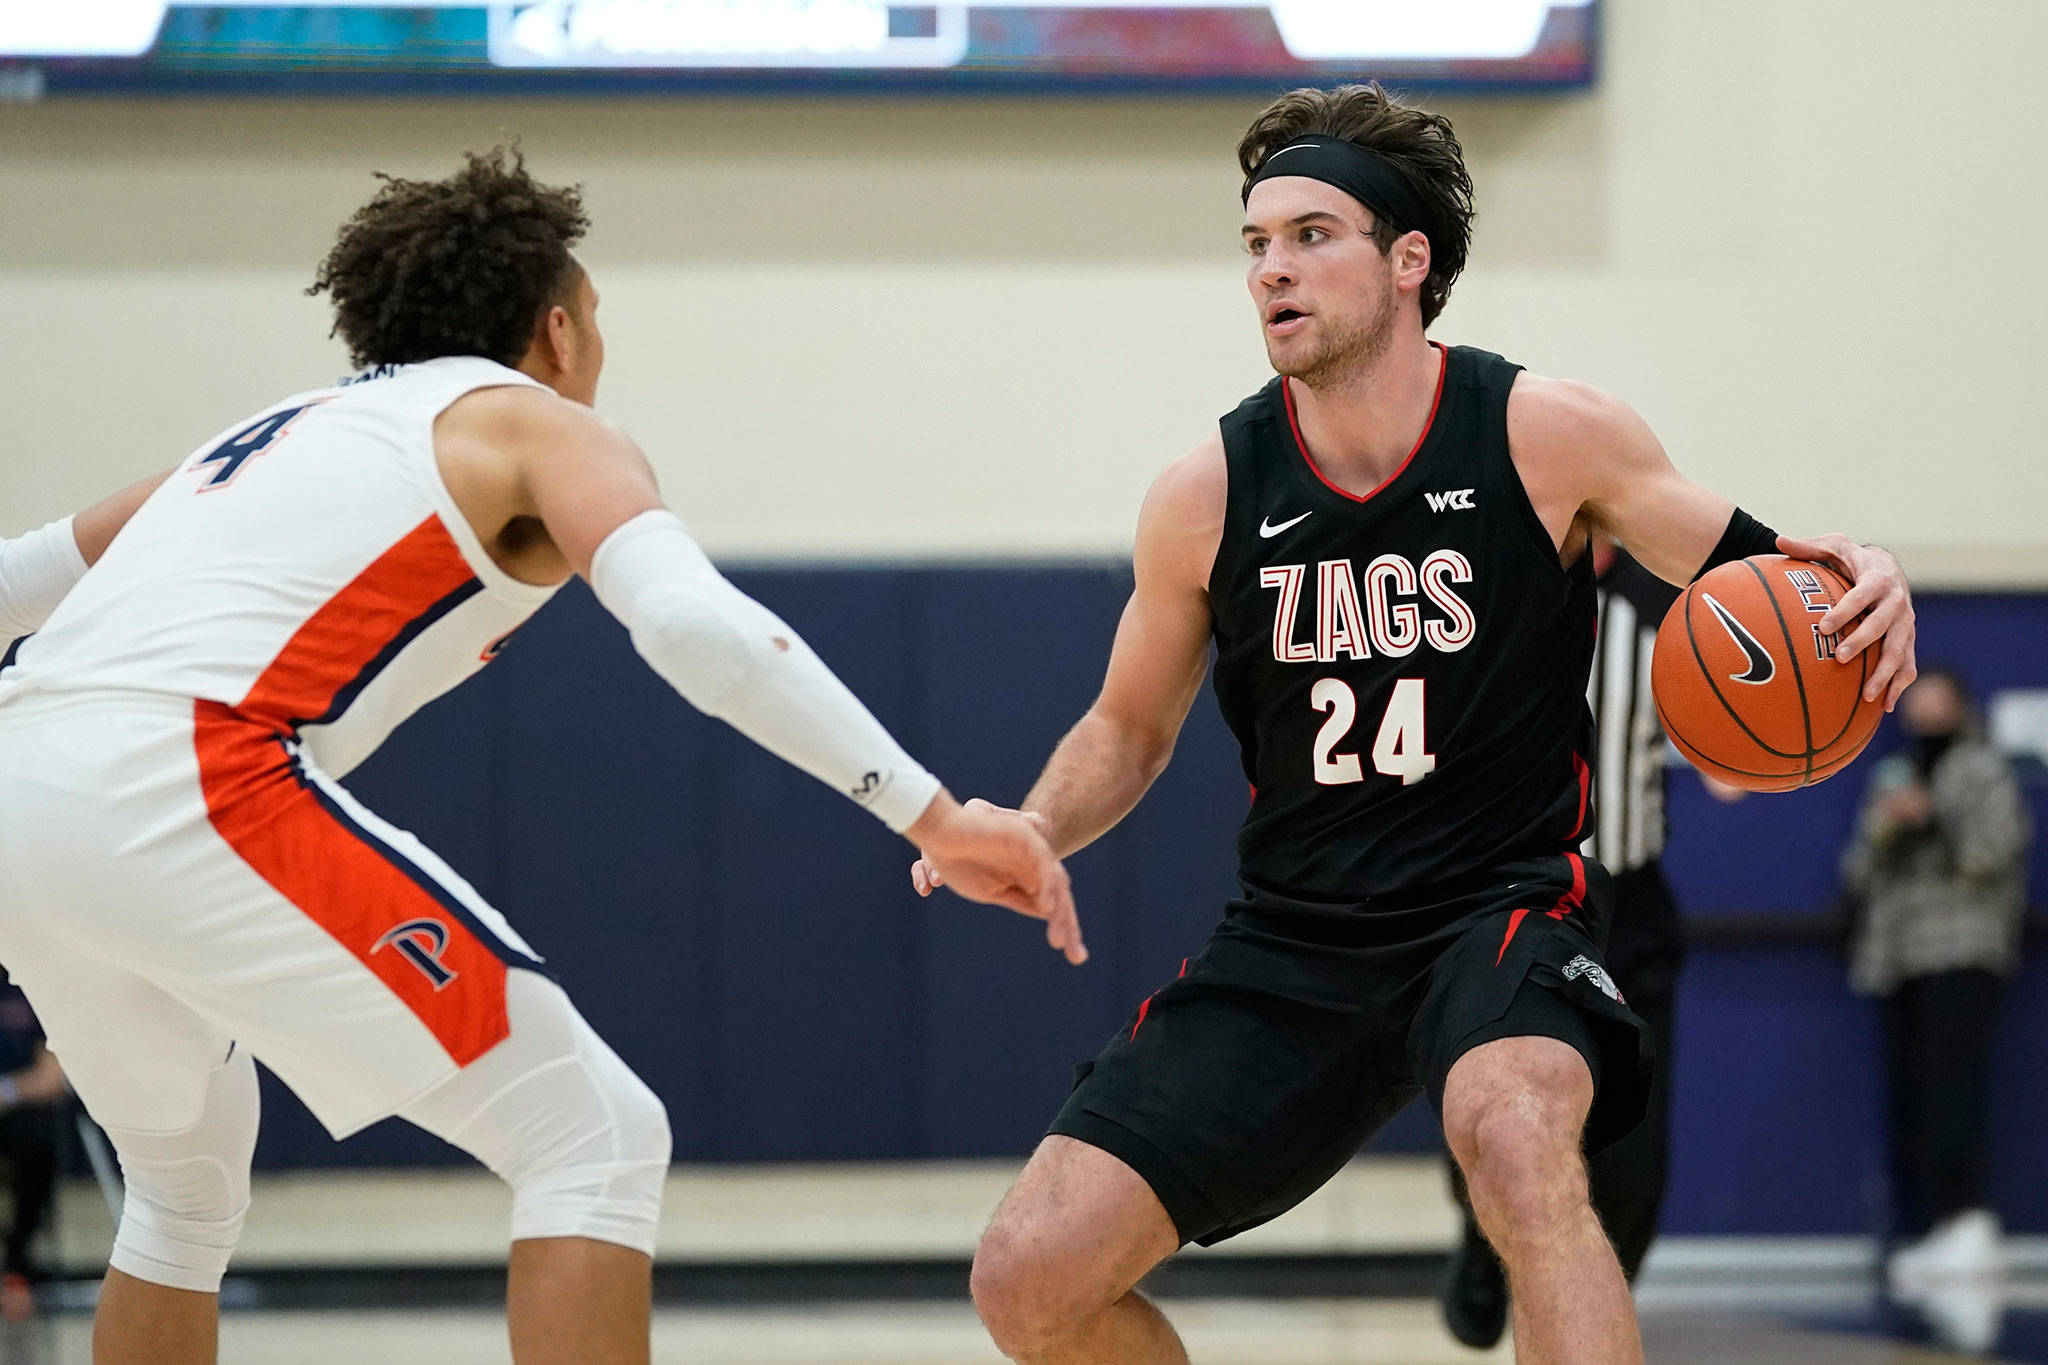 Gonzaga forward Corey Kispert (24) is guarded by Pepperdine’s Colbey Ross during the second half of a game Jan. 30, 2021, in Malibu, Calif. (AP Photo/Ashley Landis)